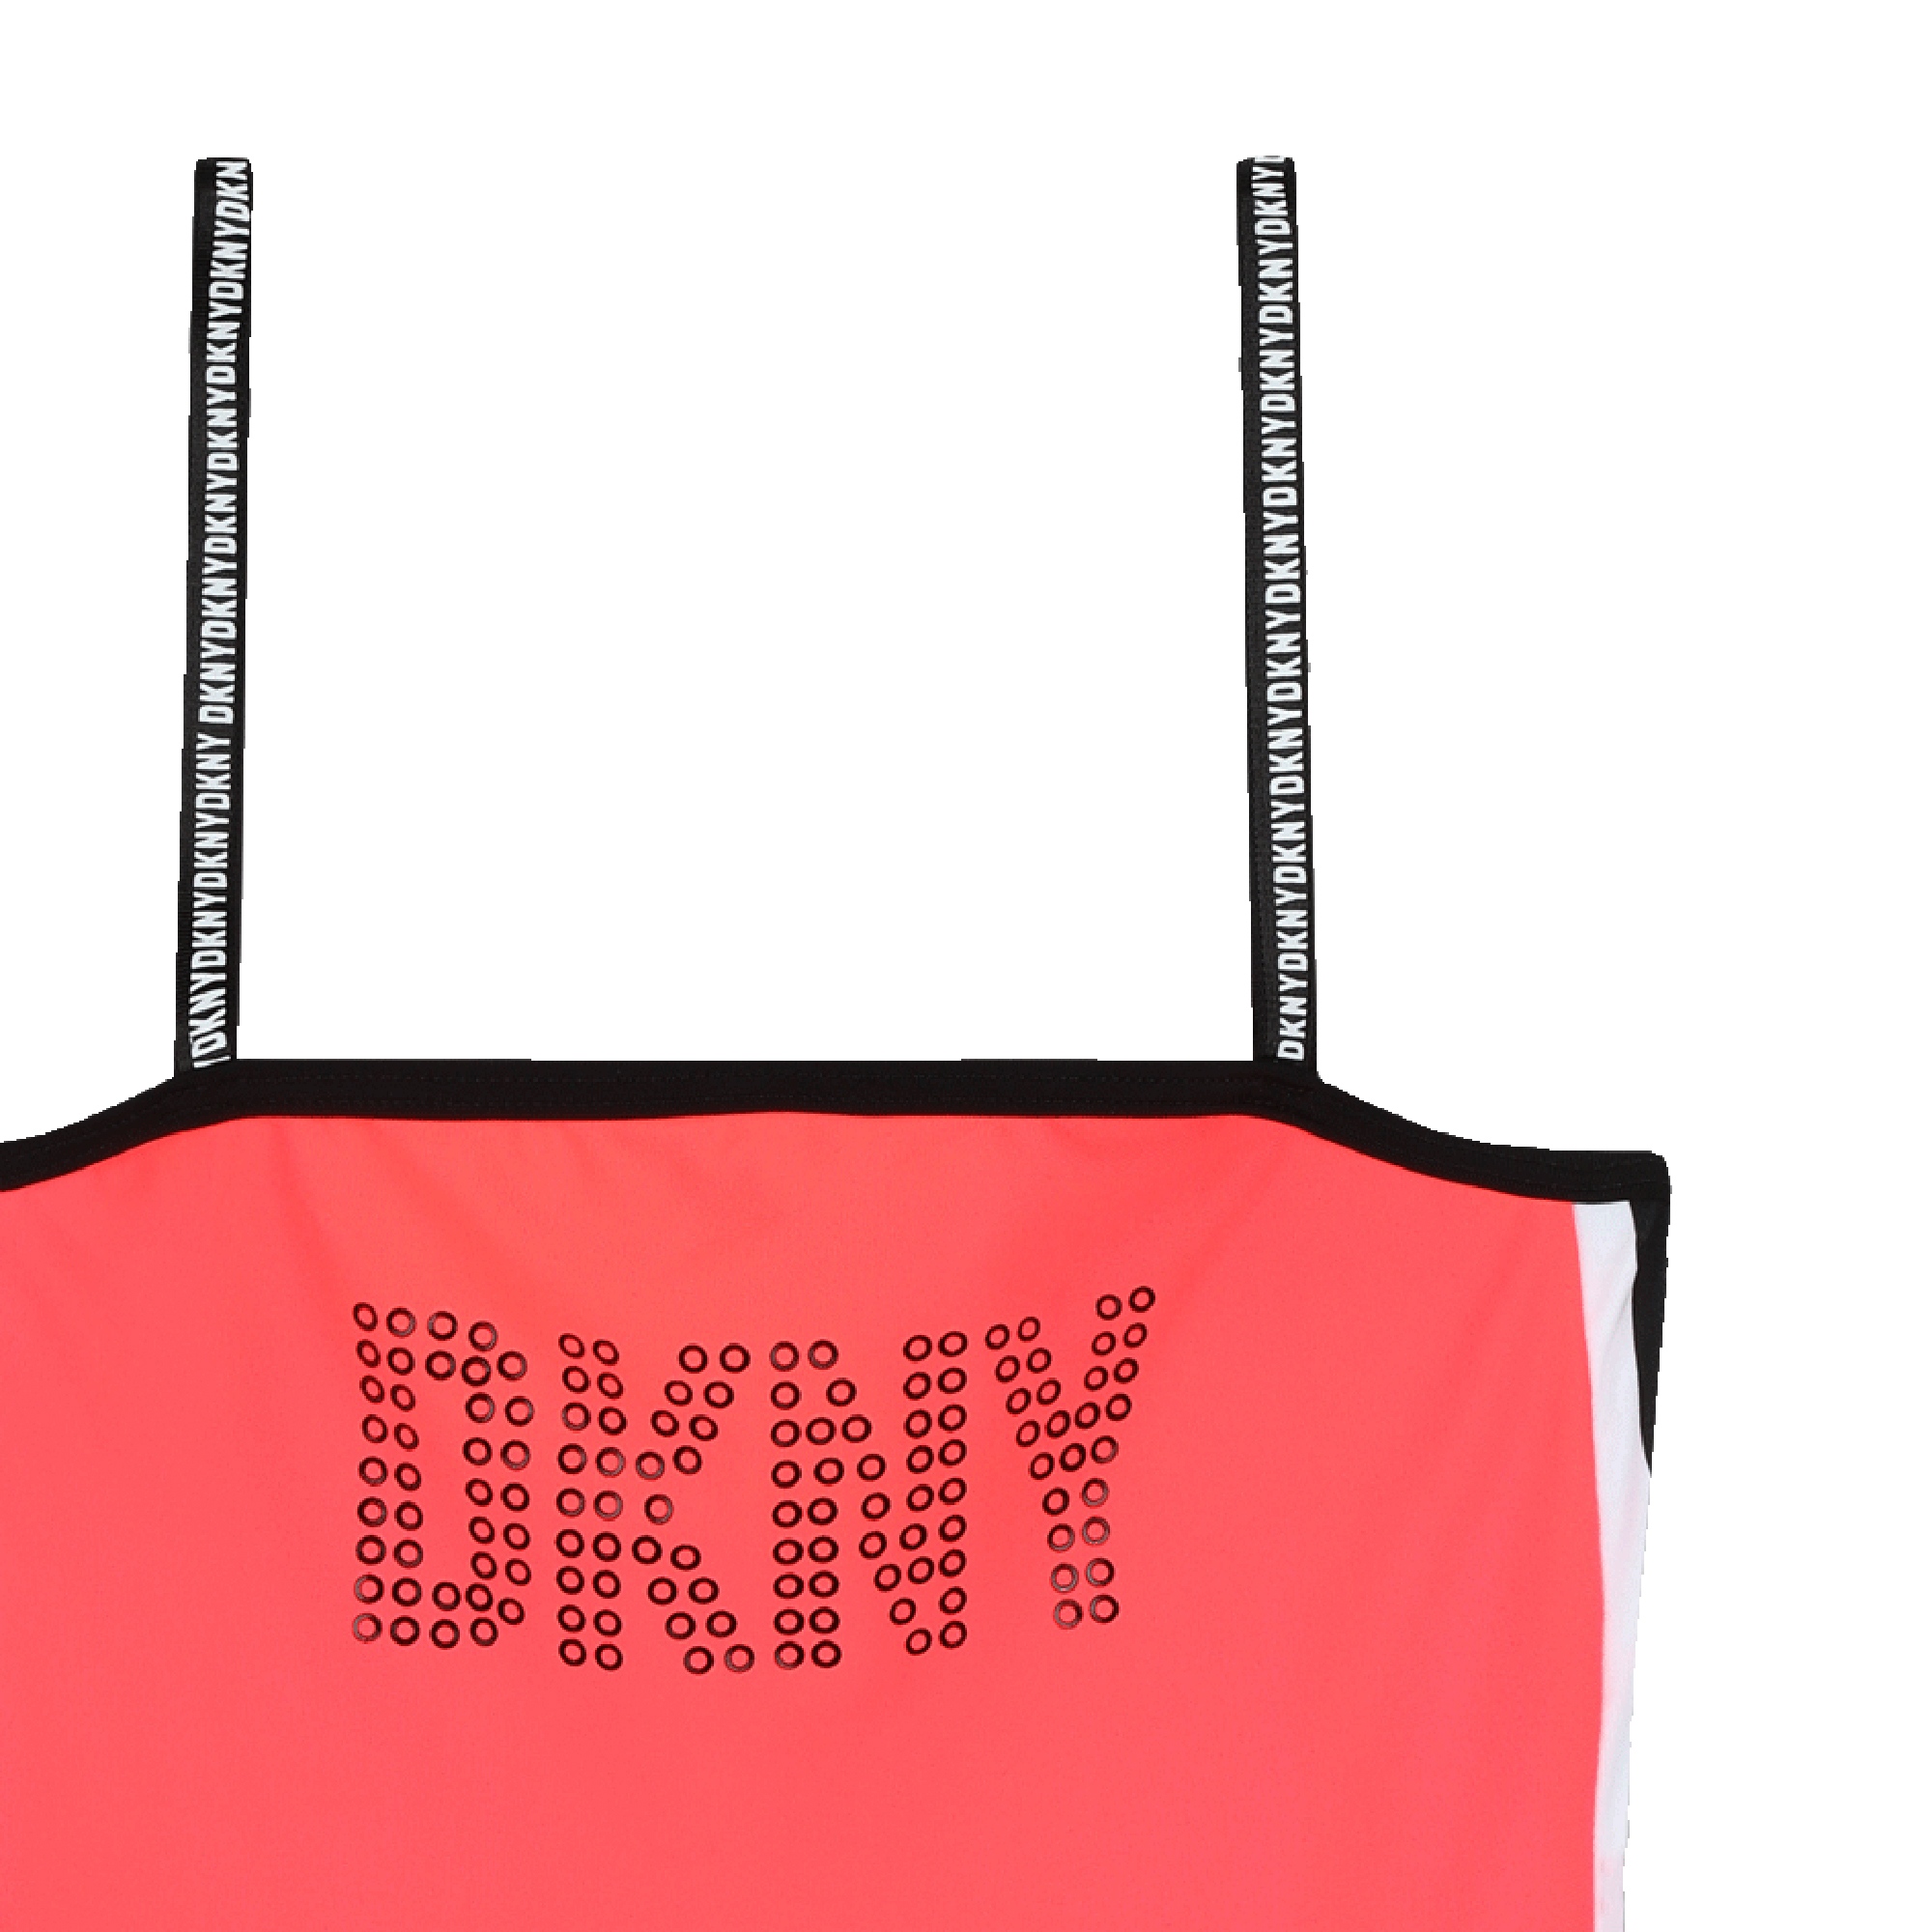 One-piece swimsuit DKNY for GIRL